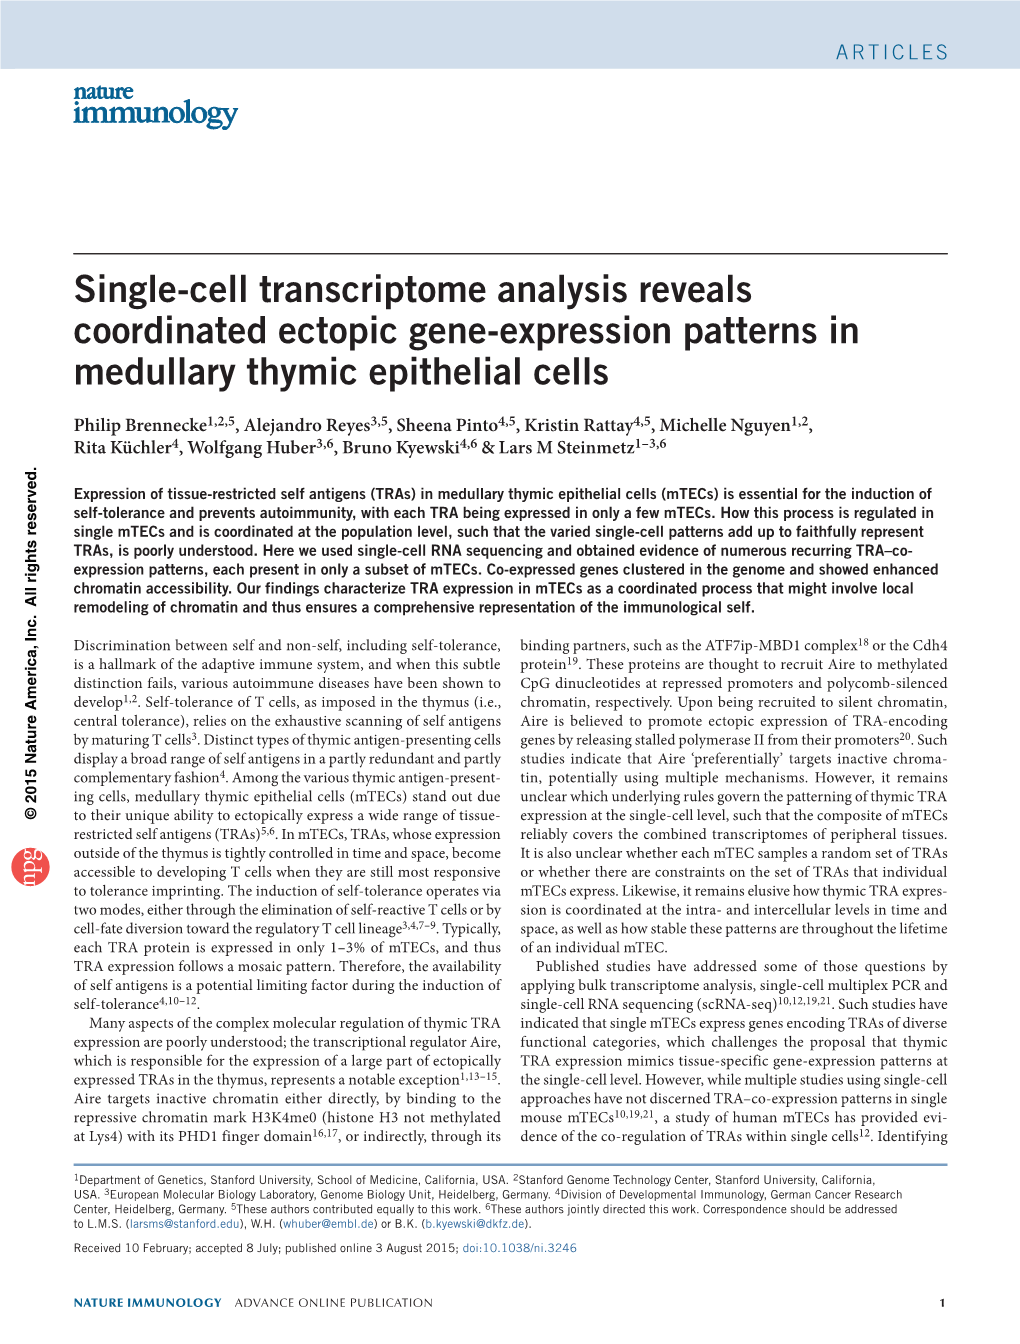 Single-Cell Transcriptome Analysis Reveals Coordinated Ectopic Gene